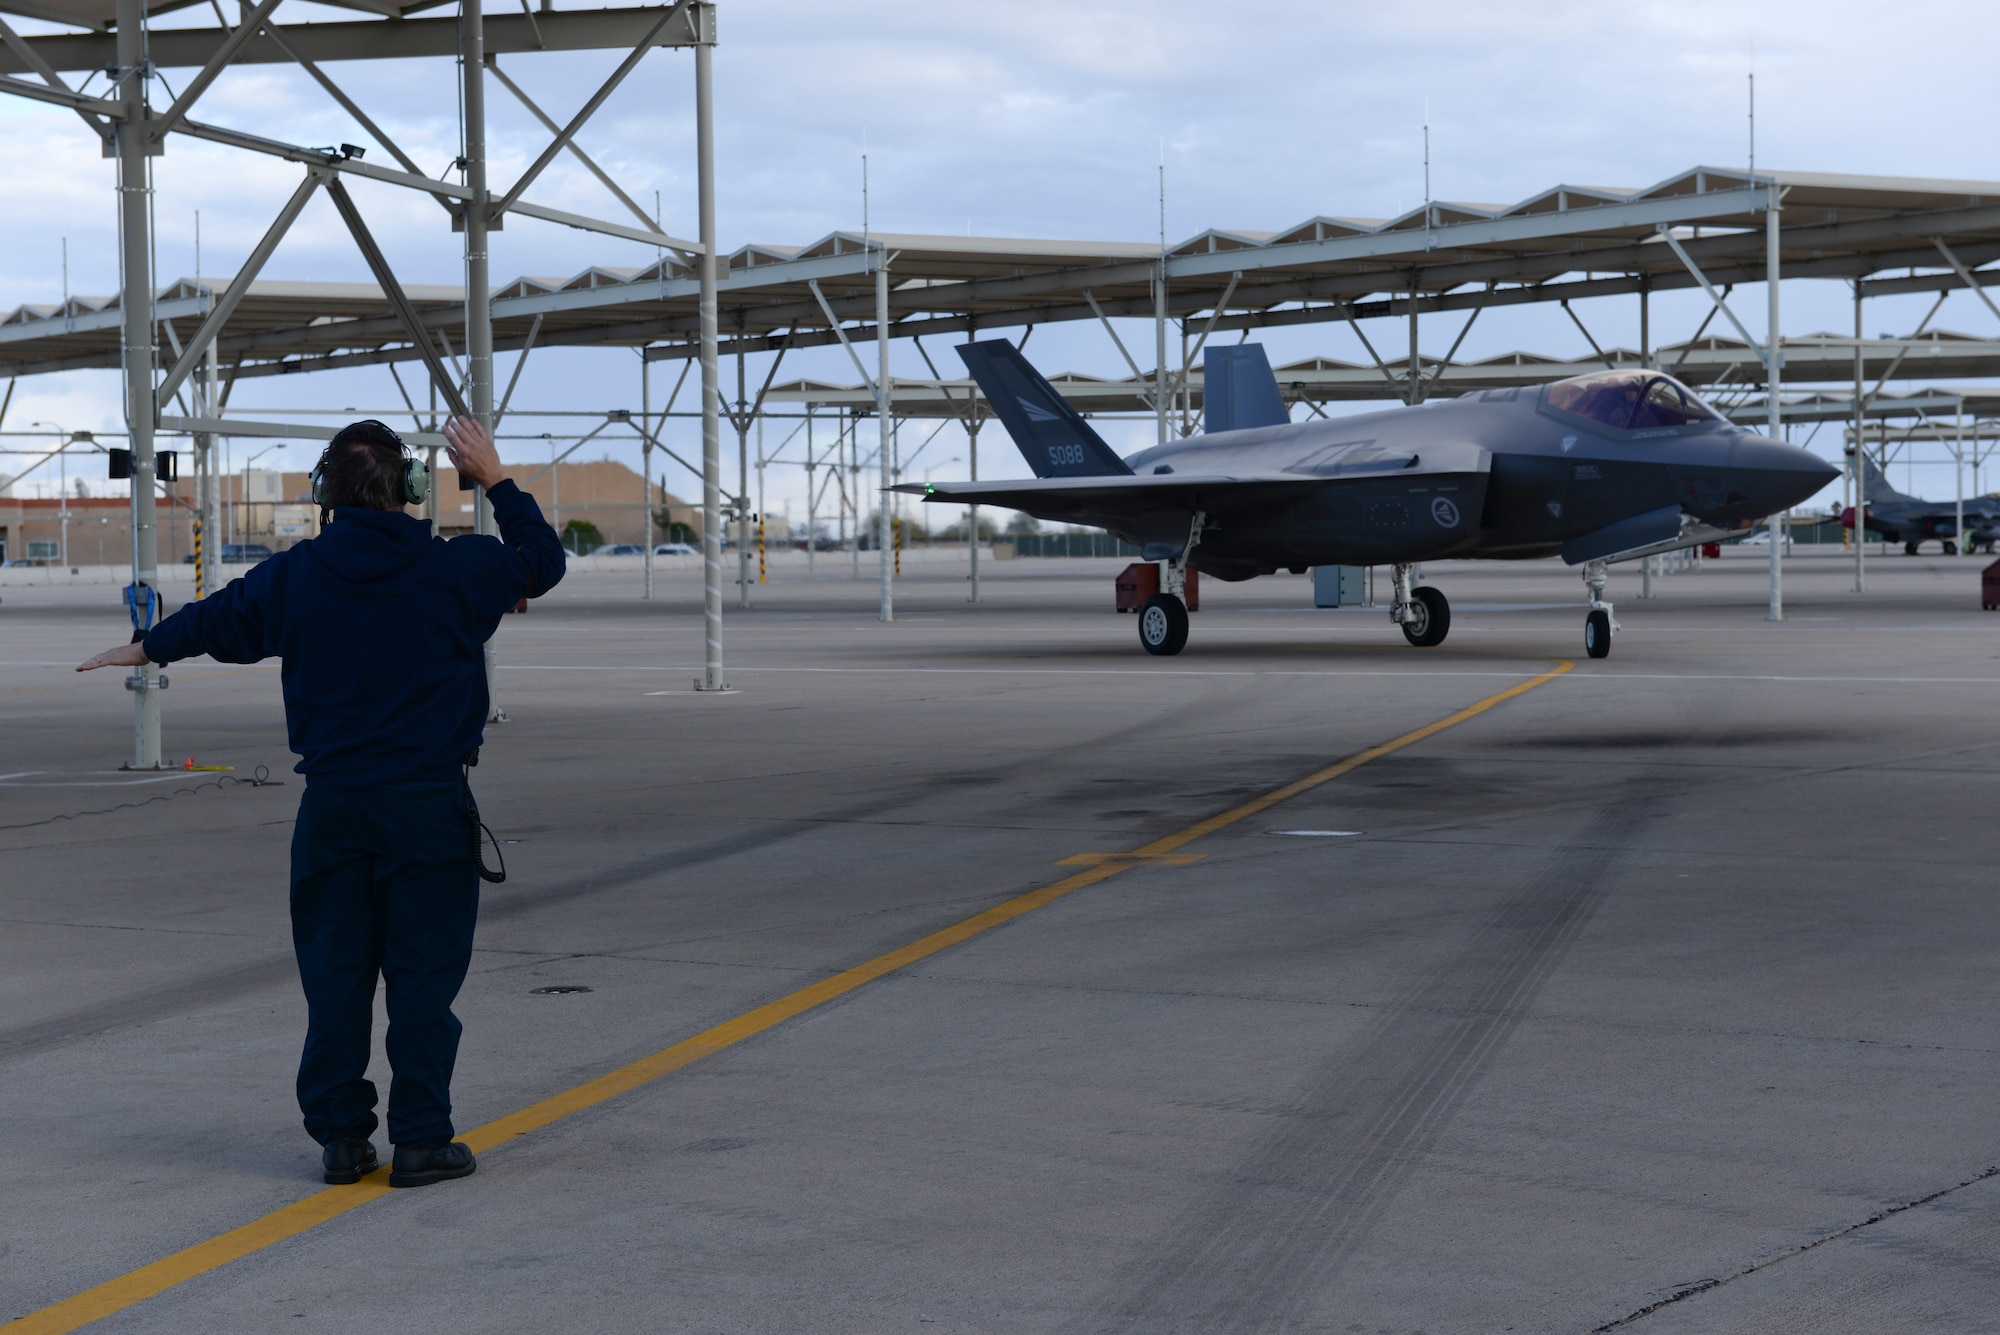 The Norwegian F-35 piloted by Norwegian Maj. Morten Hanche, 62nd Fighter Squadron F-35 student pilot, taxis to rest on the flightline after a successful sortie, Dec. 14, 2015, at Luke Air Force Base. Hanche is the first Norwegian to ever fly an F-35, and is now the first Norwegian to have piloted a Norwegian-specific F-35. (U.S. Air Force photo by Airman 1st Class Ridge Shan)